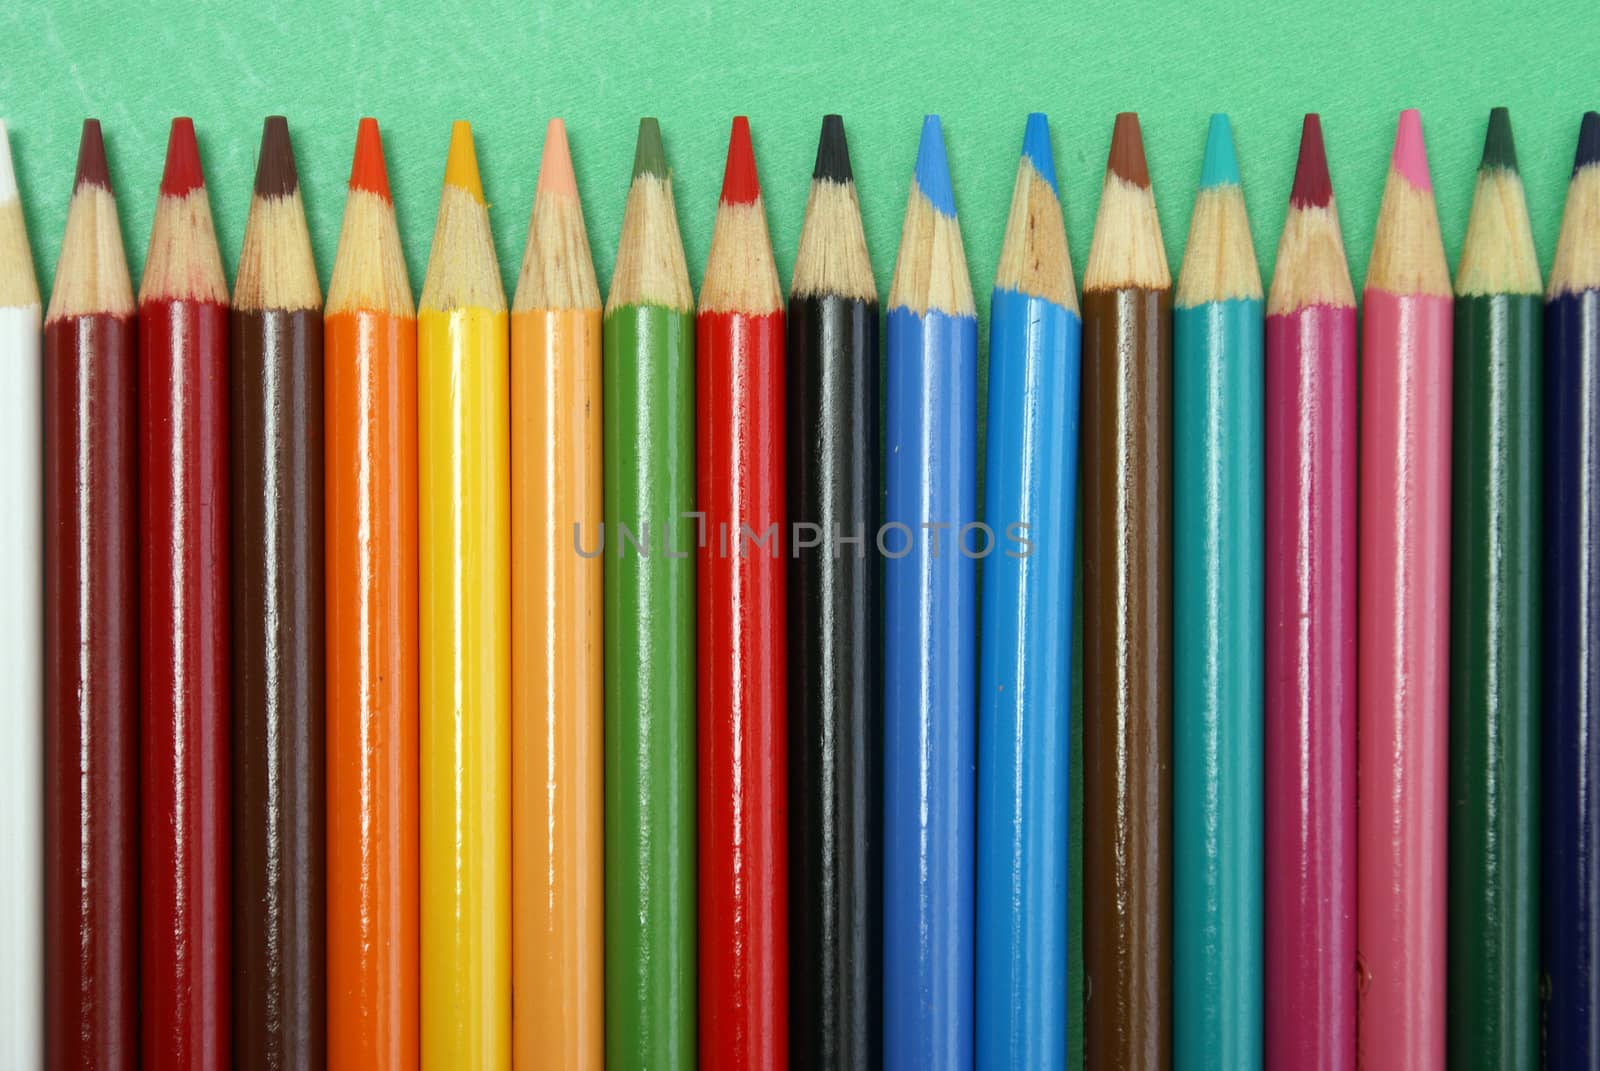 A row of various colored pencil crayons.